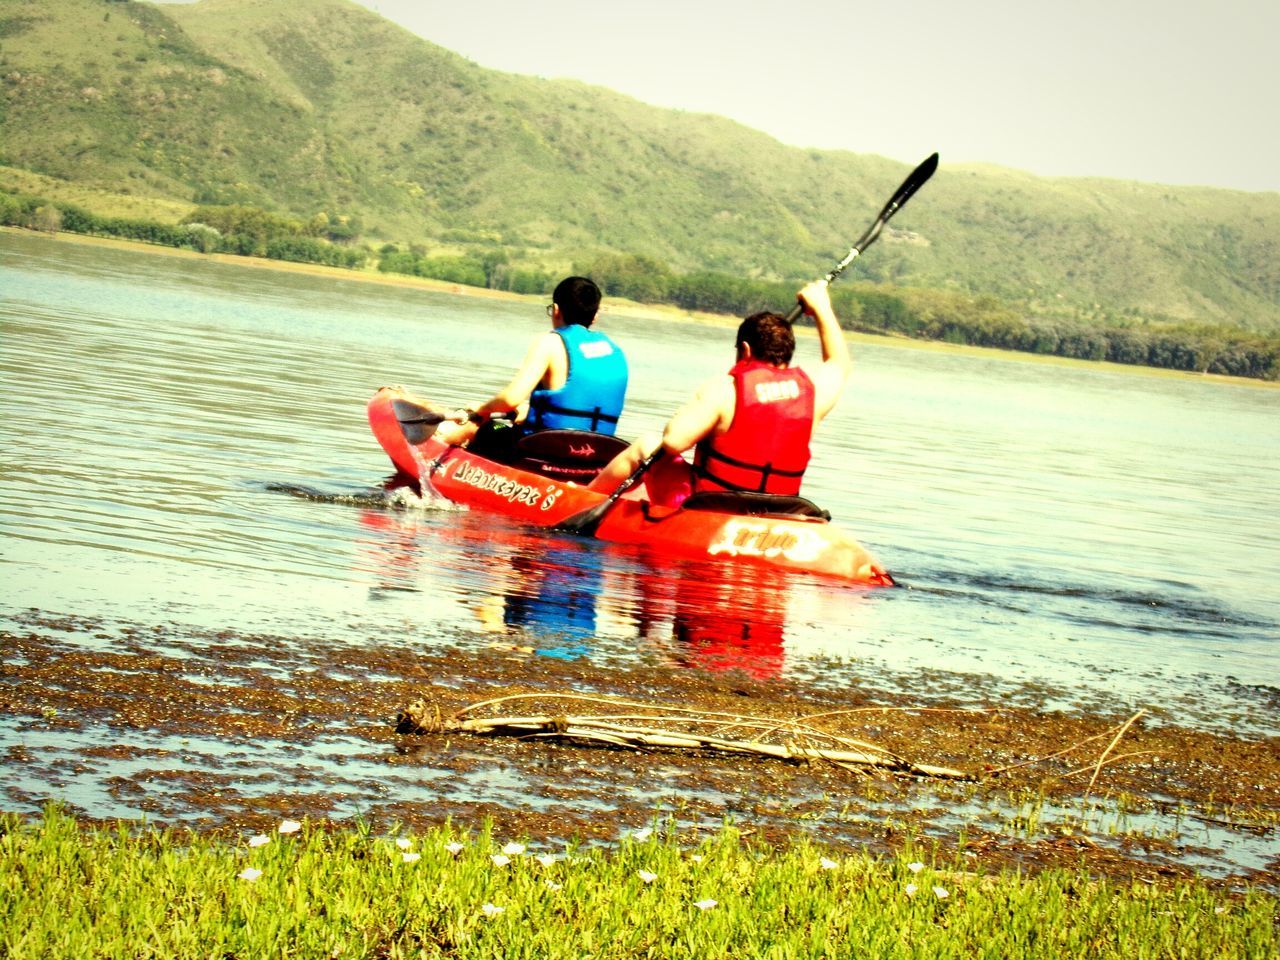 two people, kayak, leisure activity, real people, lifestyles, men, outdoors, nature, lake, nautical vessel, water, full length, togetherness, day, vacations, adventure, beauty in nature, oar, sky, adult, people, adults only